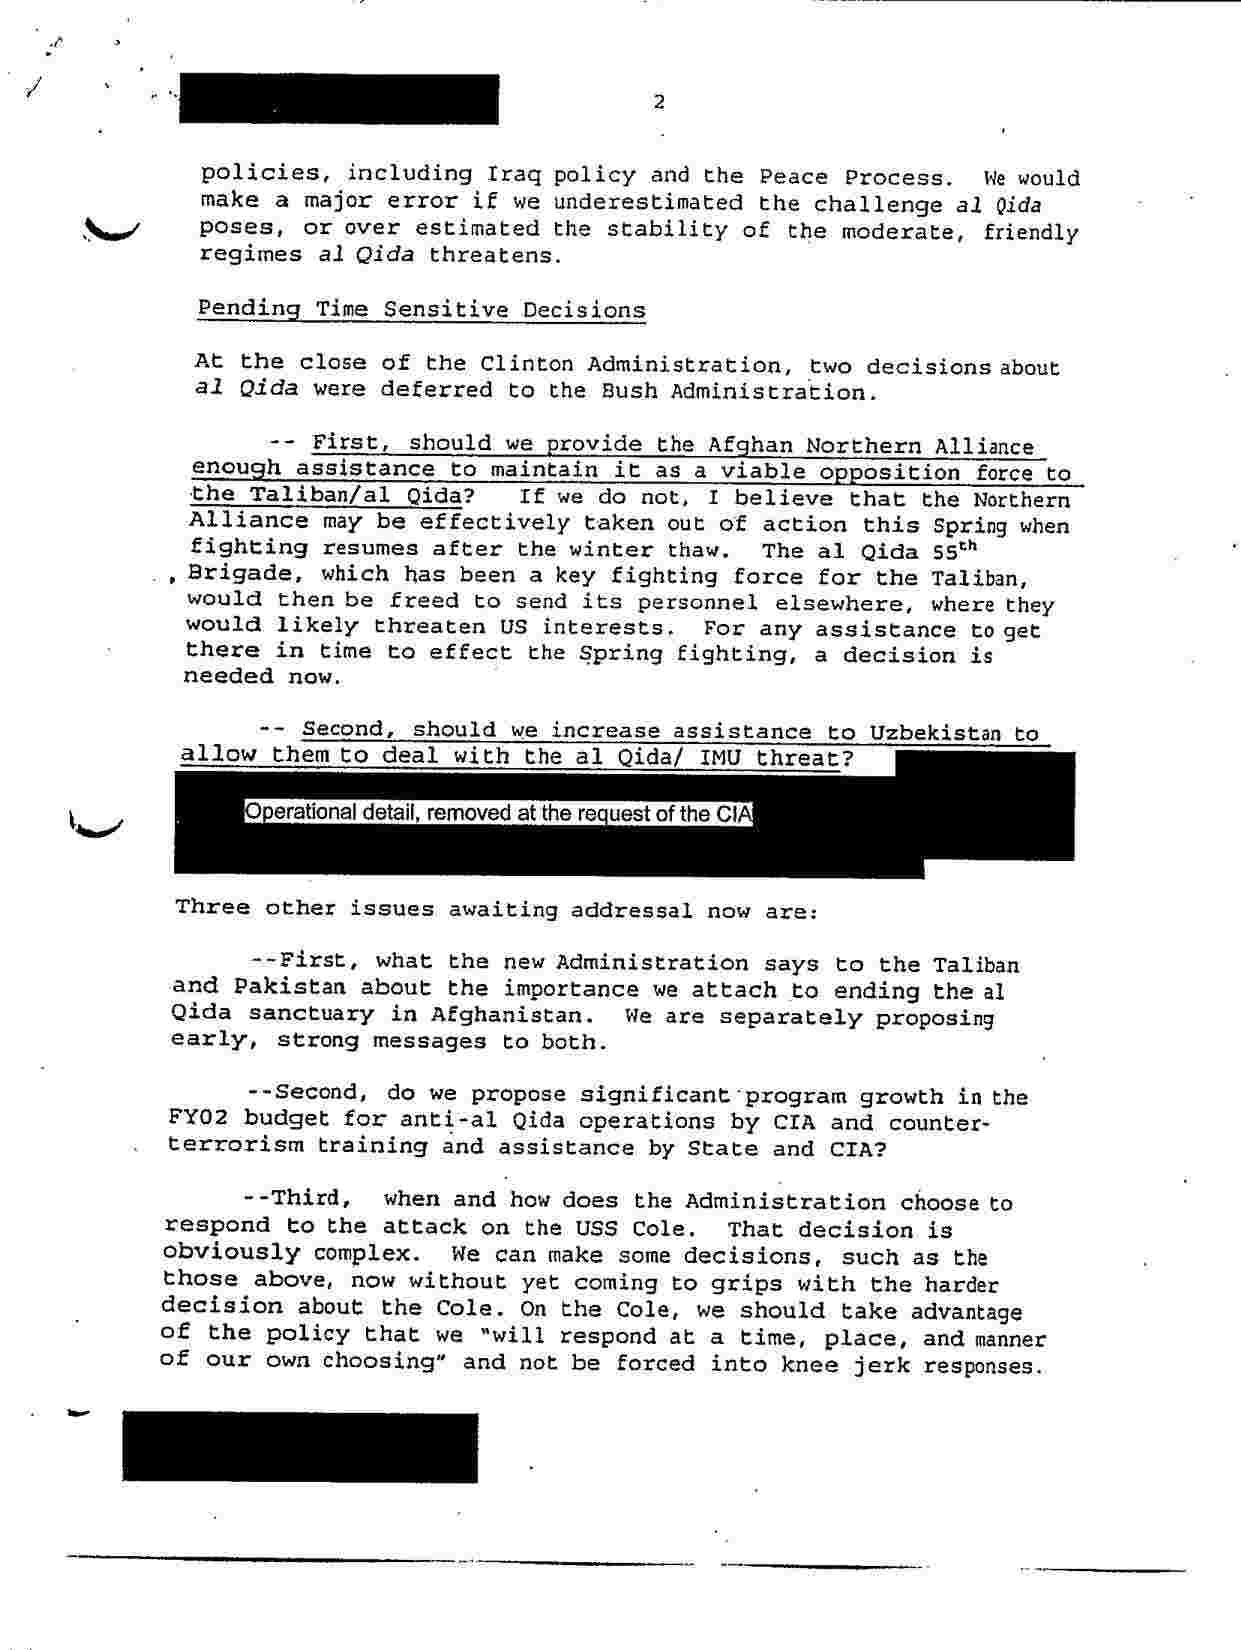 NSC memo page 2